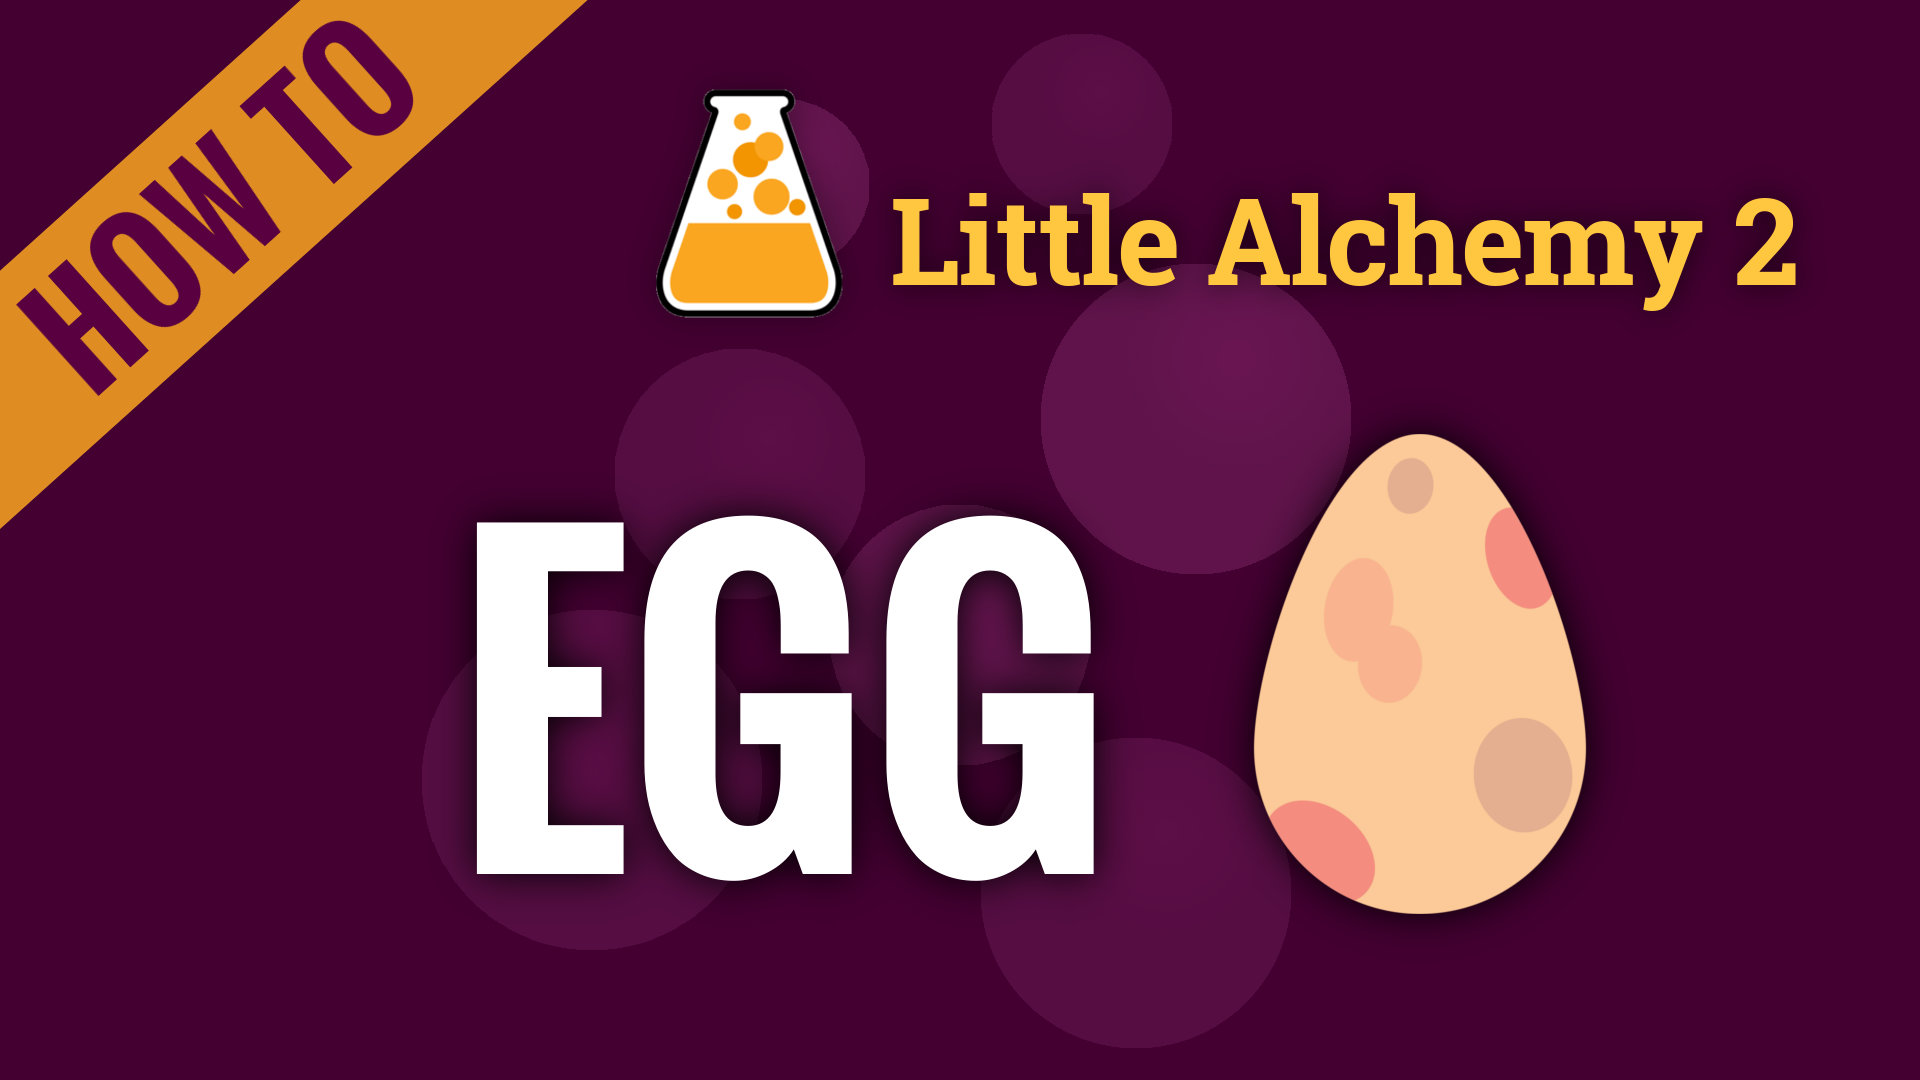 How To Make Egg In Little Alchemy 2